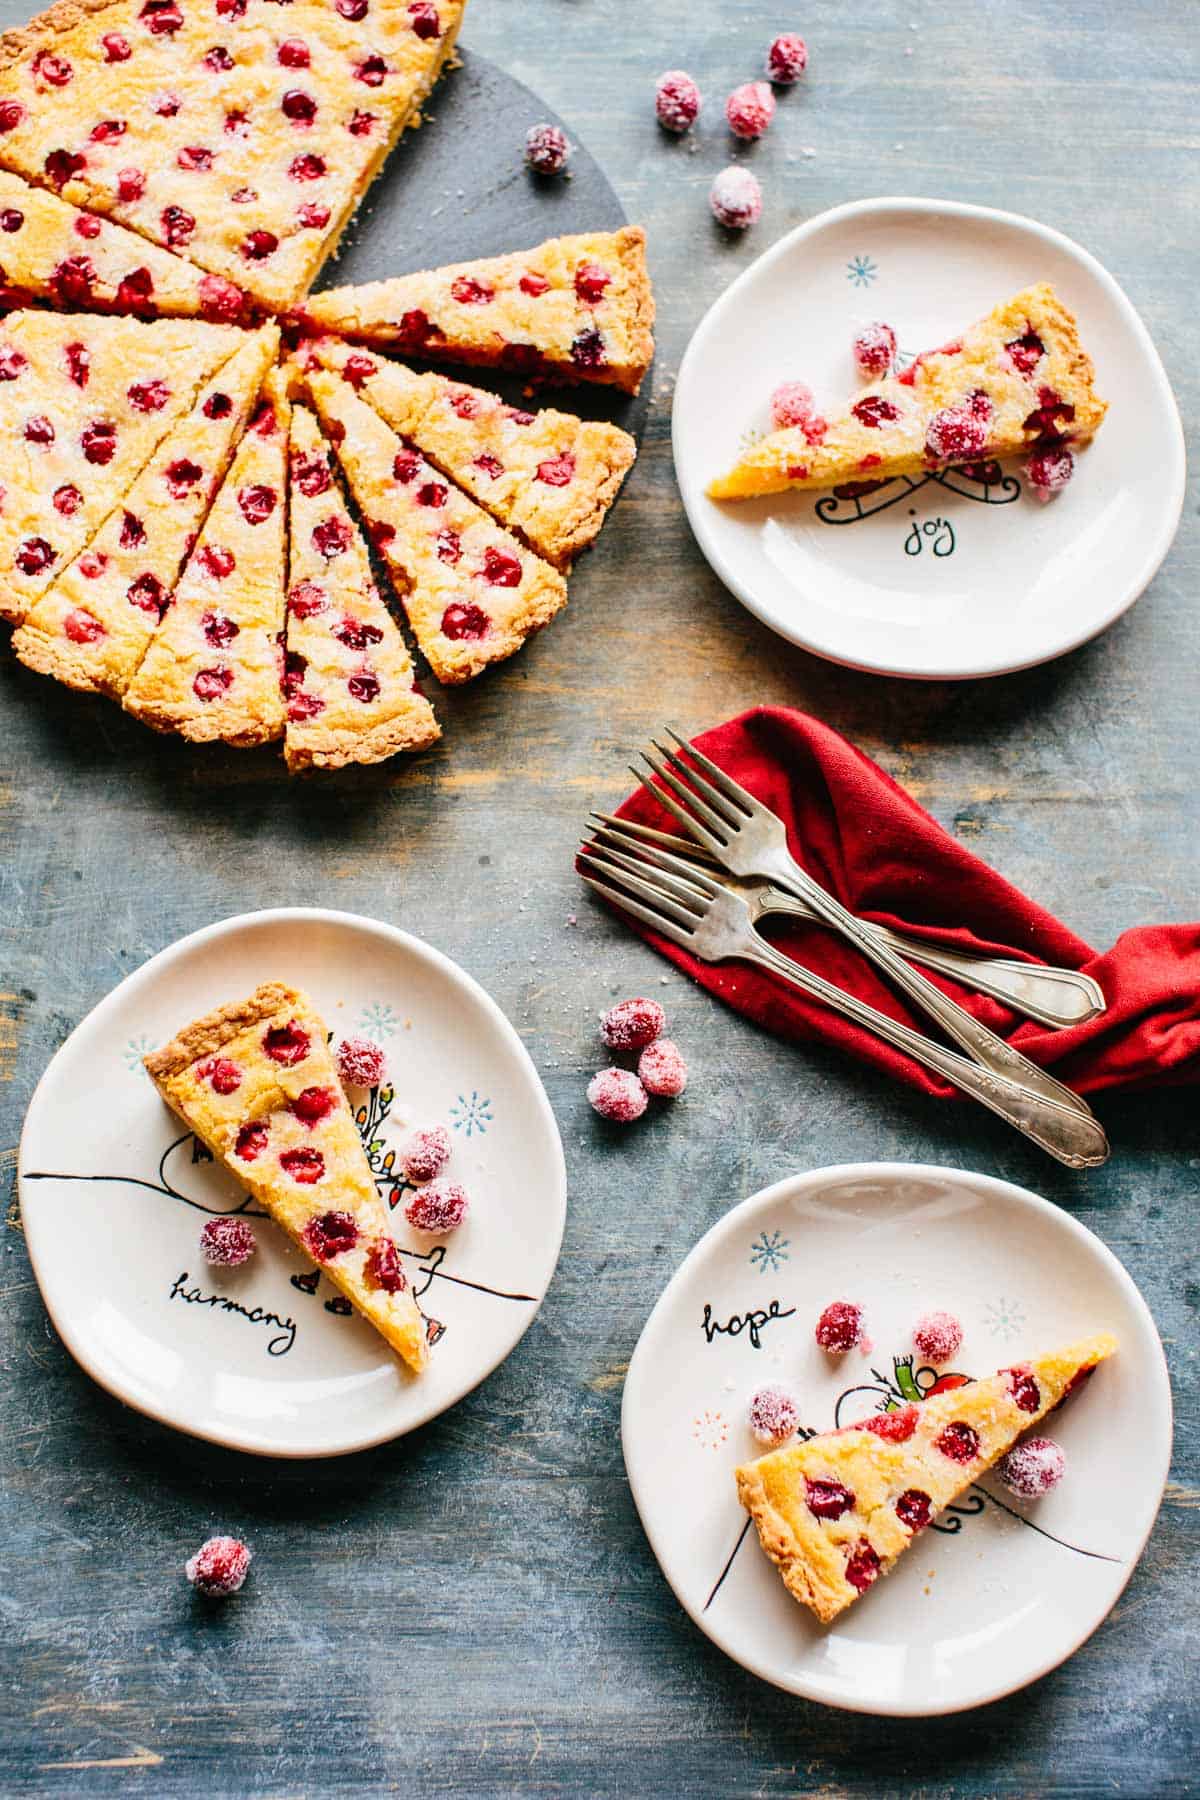 Birds eye view of several plates with slices of tart and a red napkin with silverware.